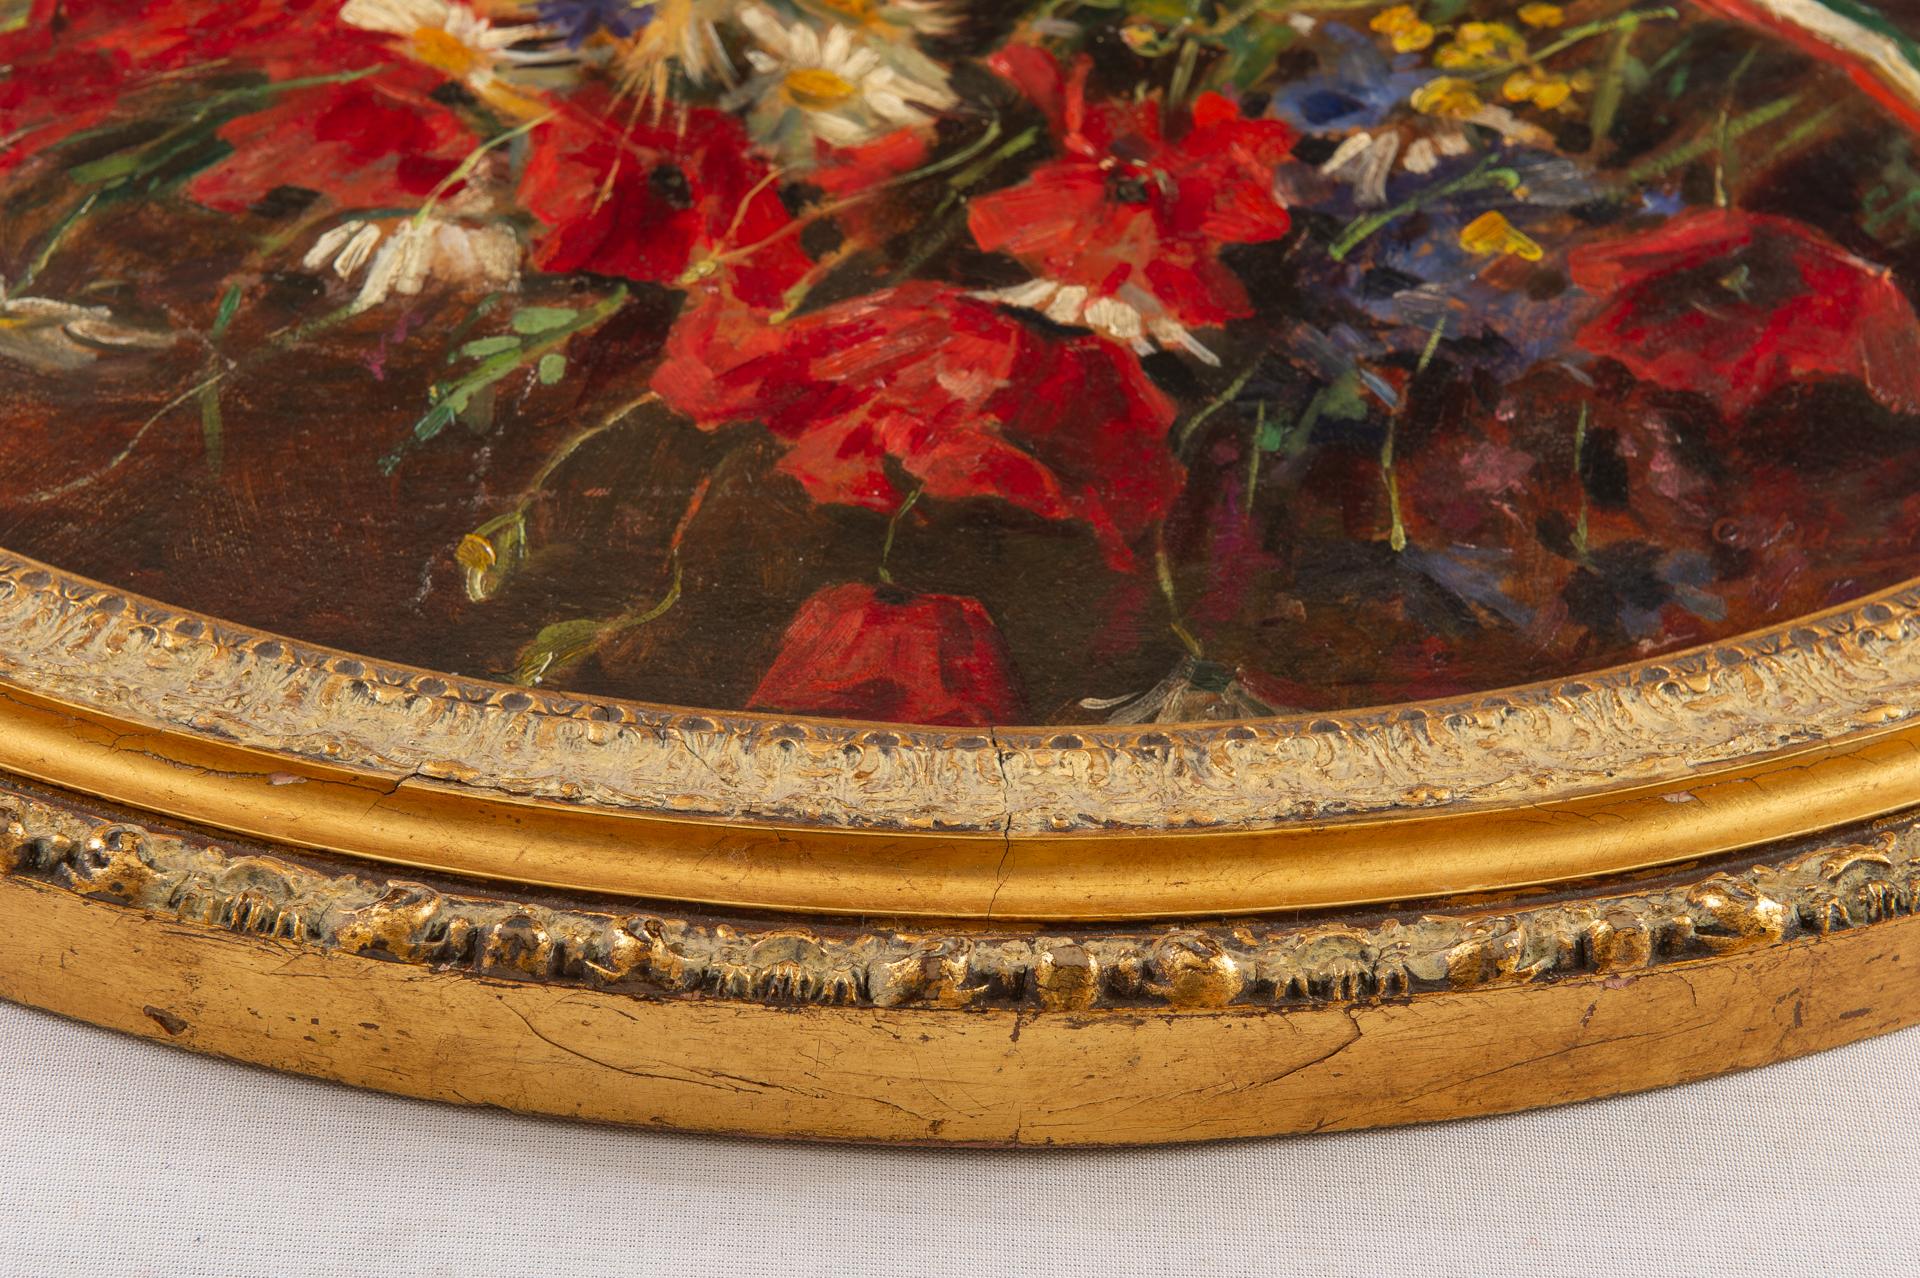 Masonite Oval Picture with Poppies For Sale